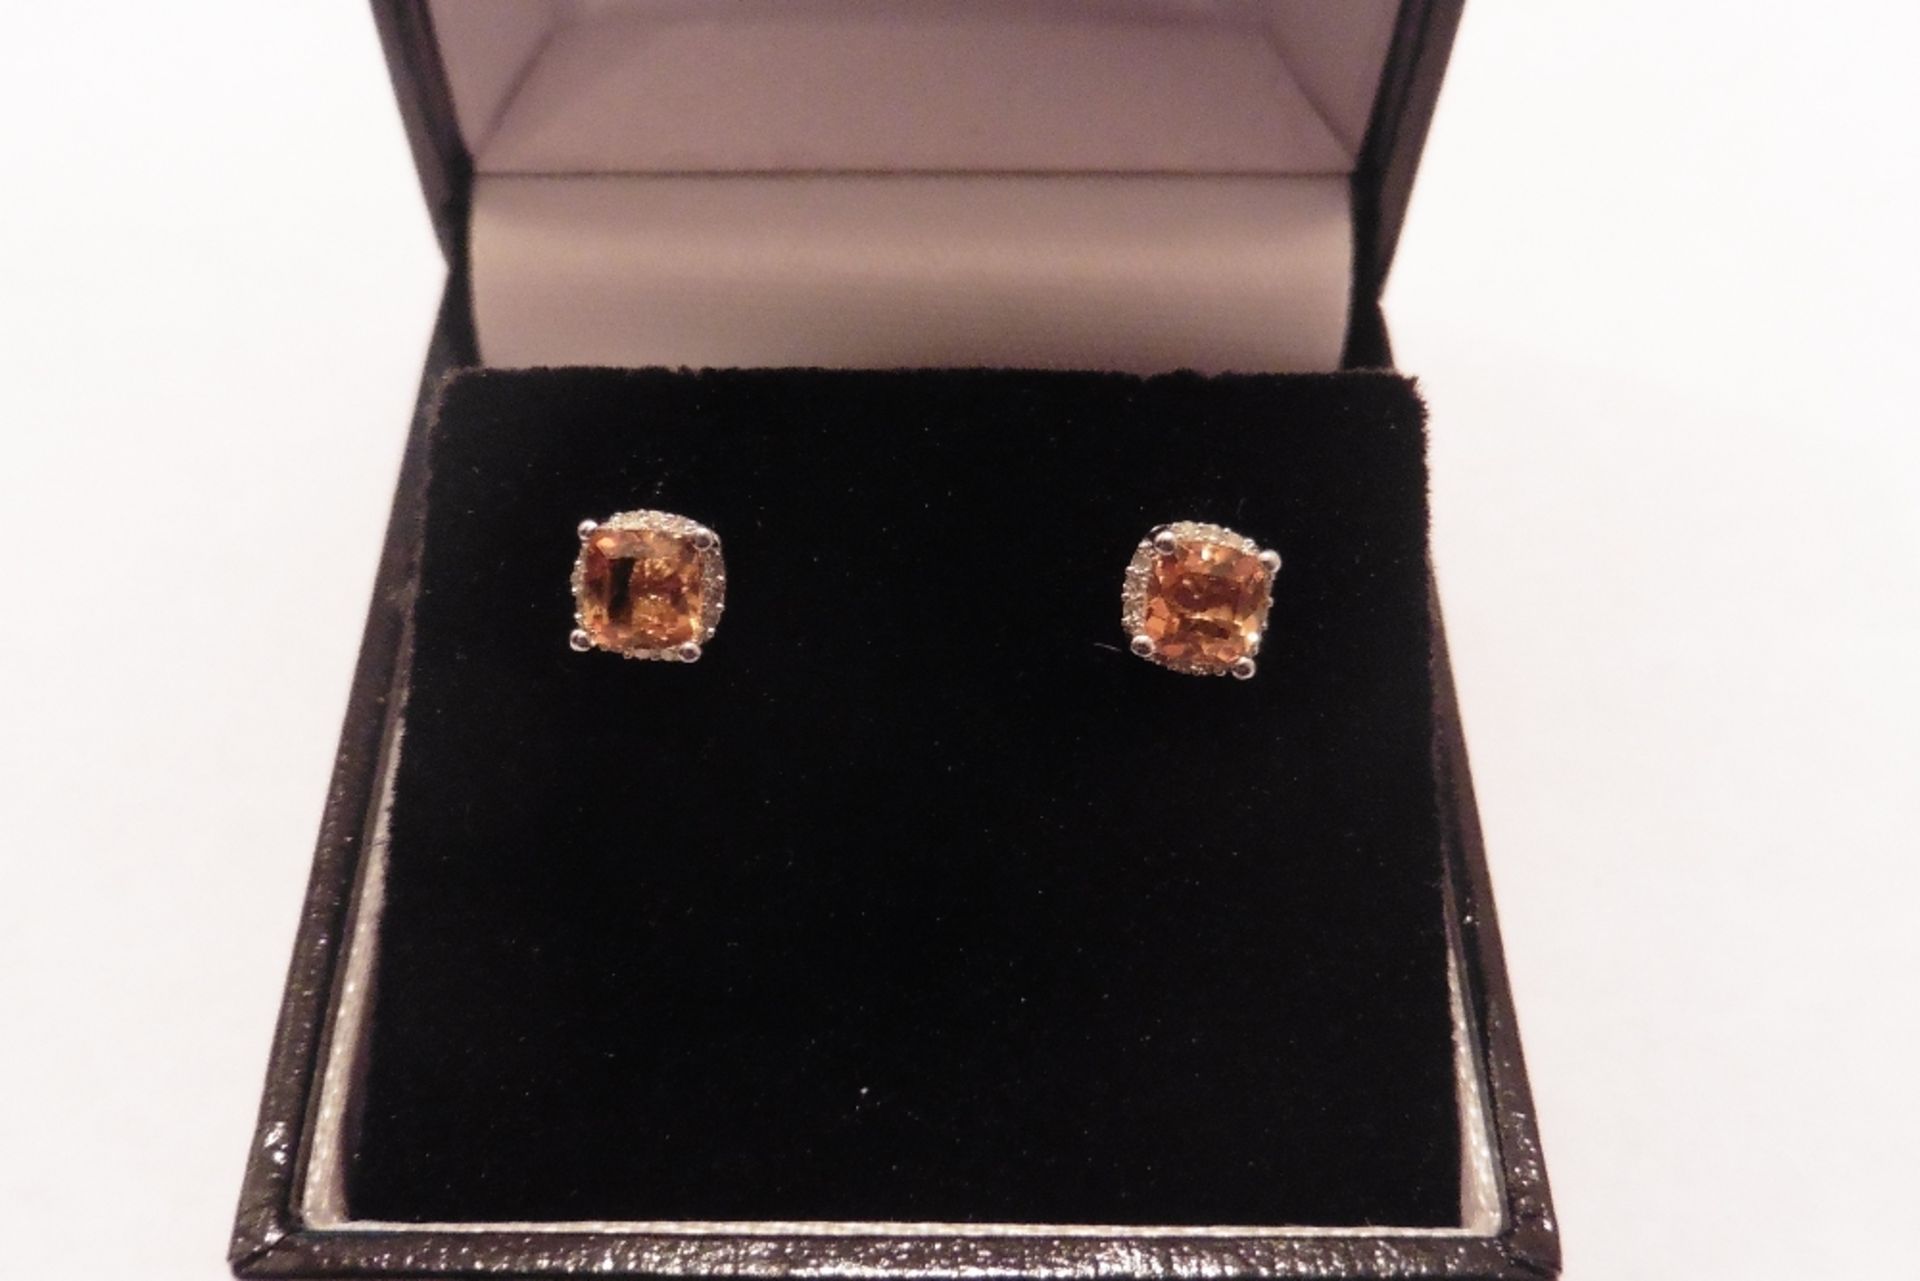 9ct white gold citrine and diamond earrings each set with a cushion cut citrine, total weight is 0.6